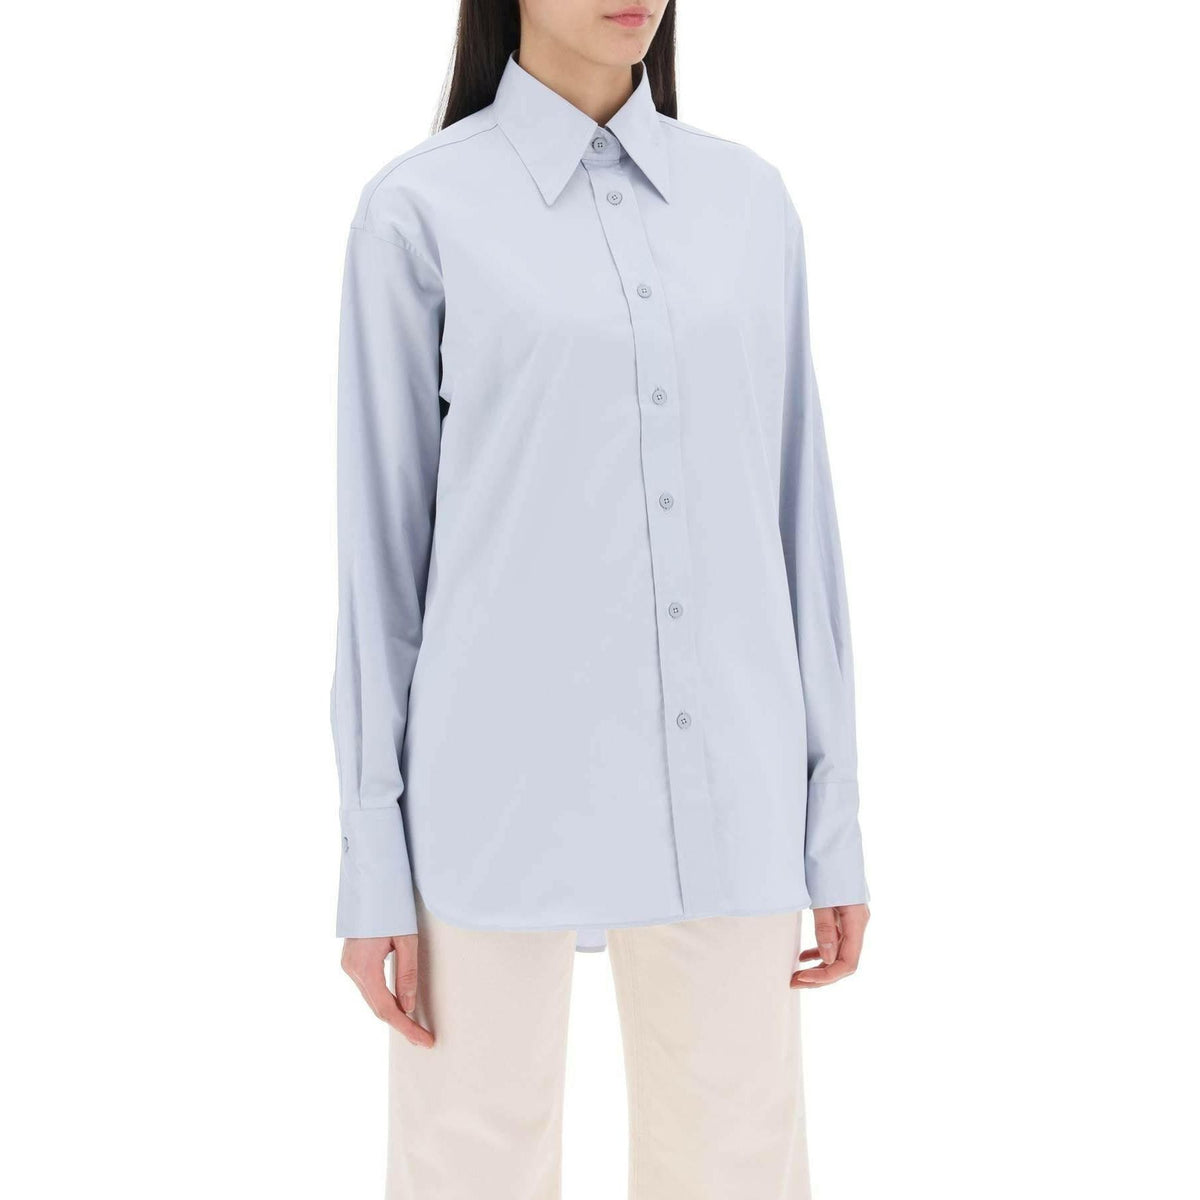 Closed Relaxed Fit Shirt with Open Back Detail - JOHN JULIA